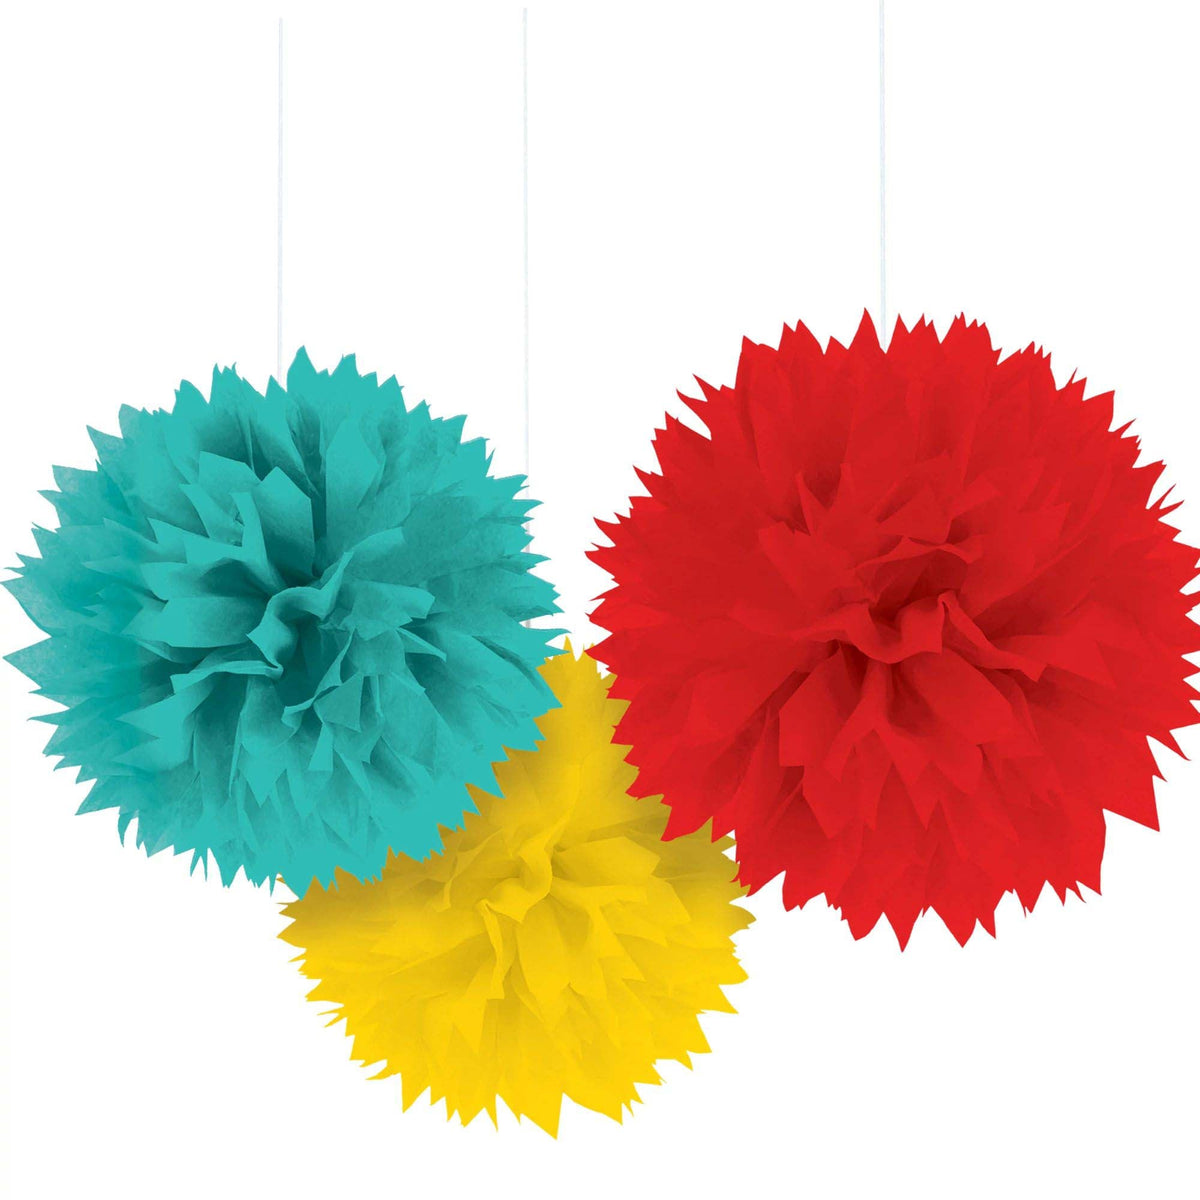 AMSCAN CA Decorations Rainbow Hanging Fluffy Decorations, 16 Inches, 3 Count